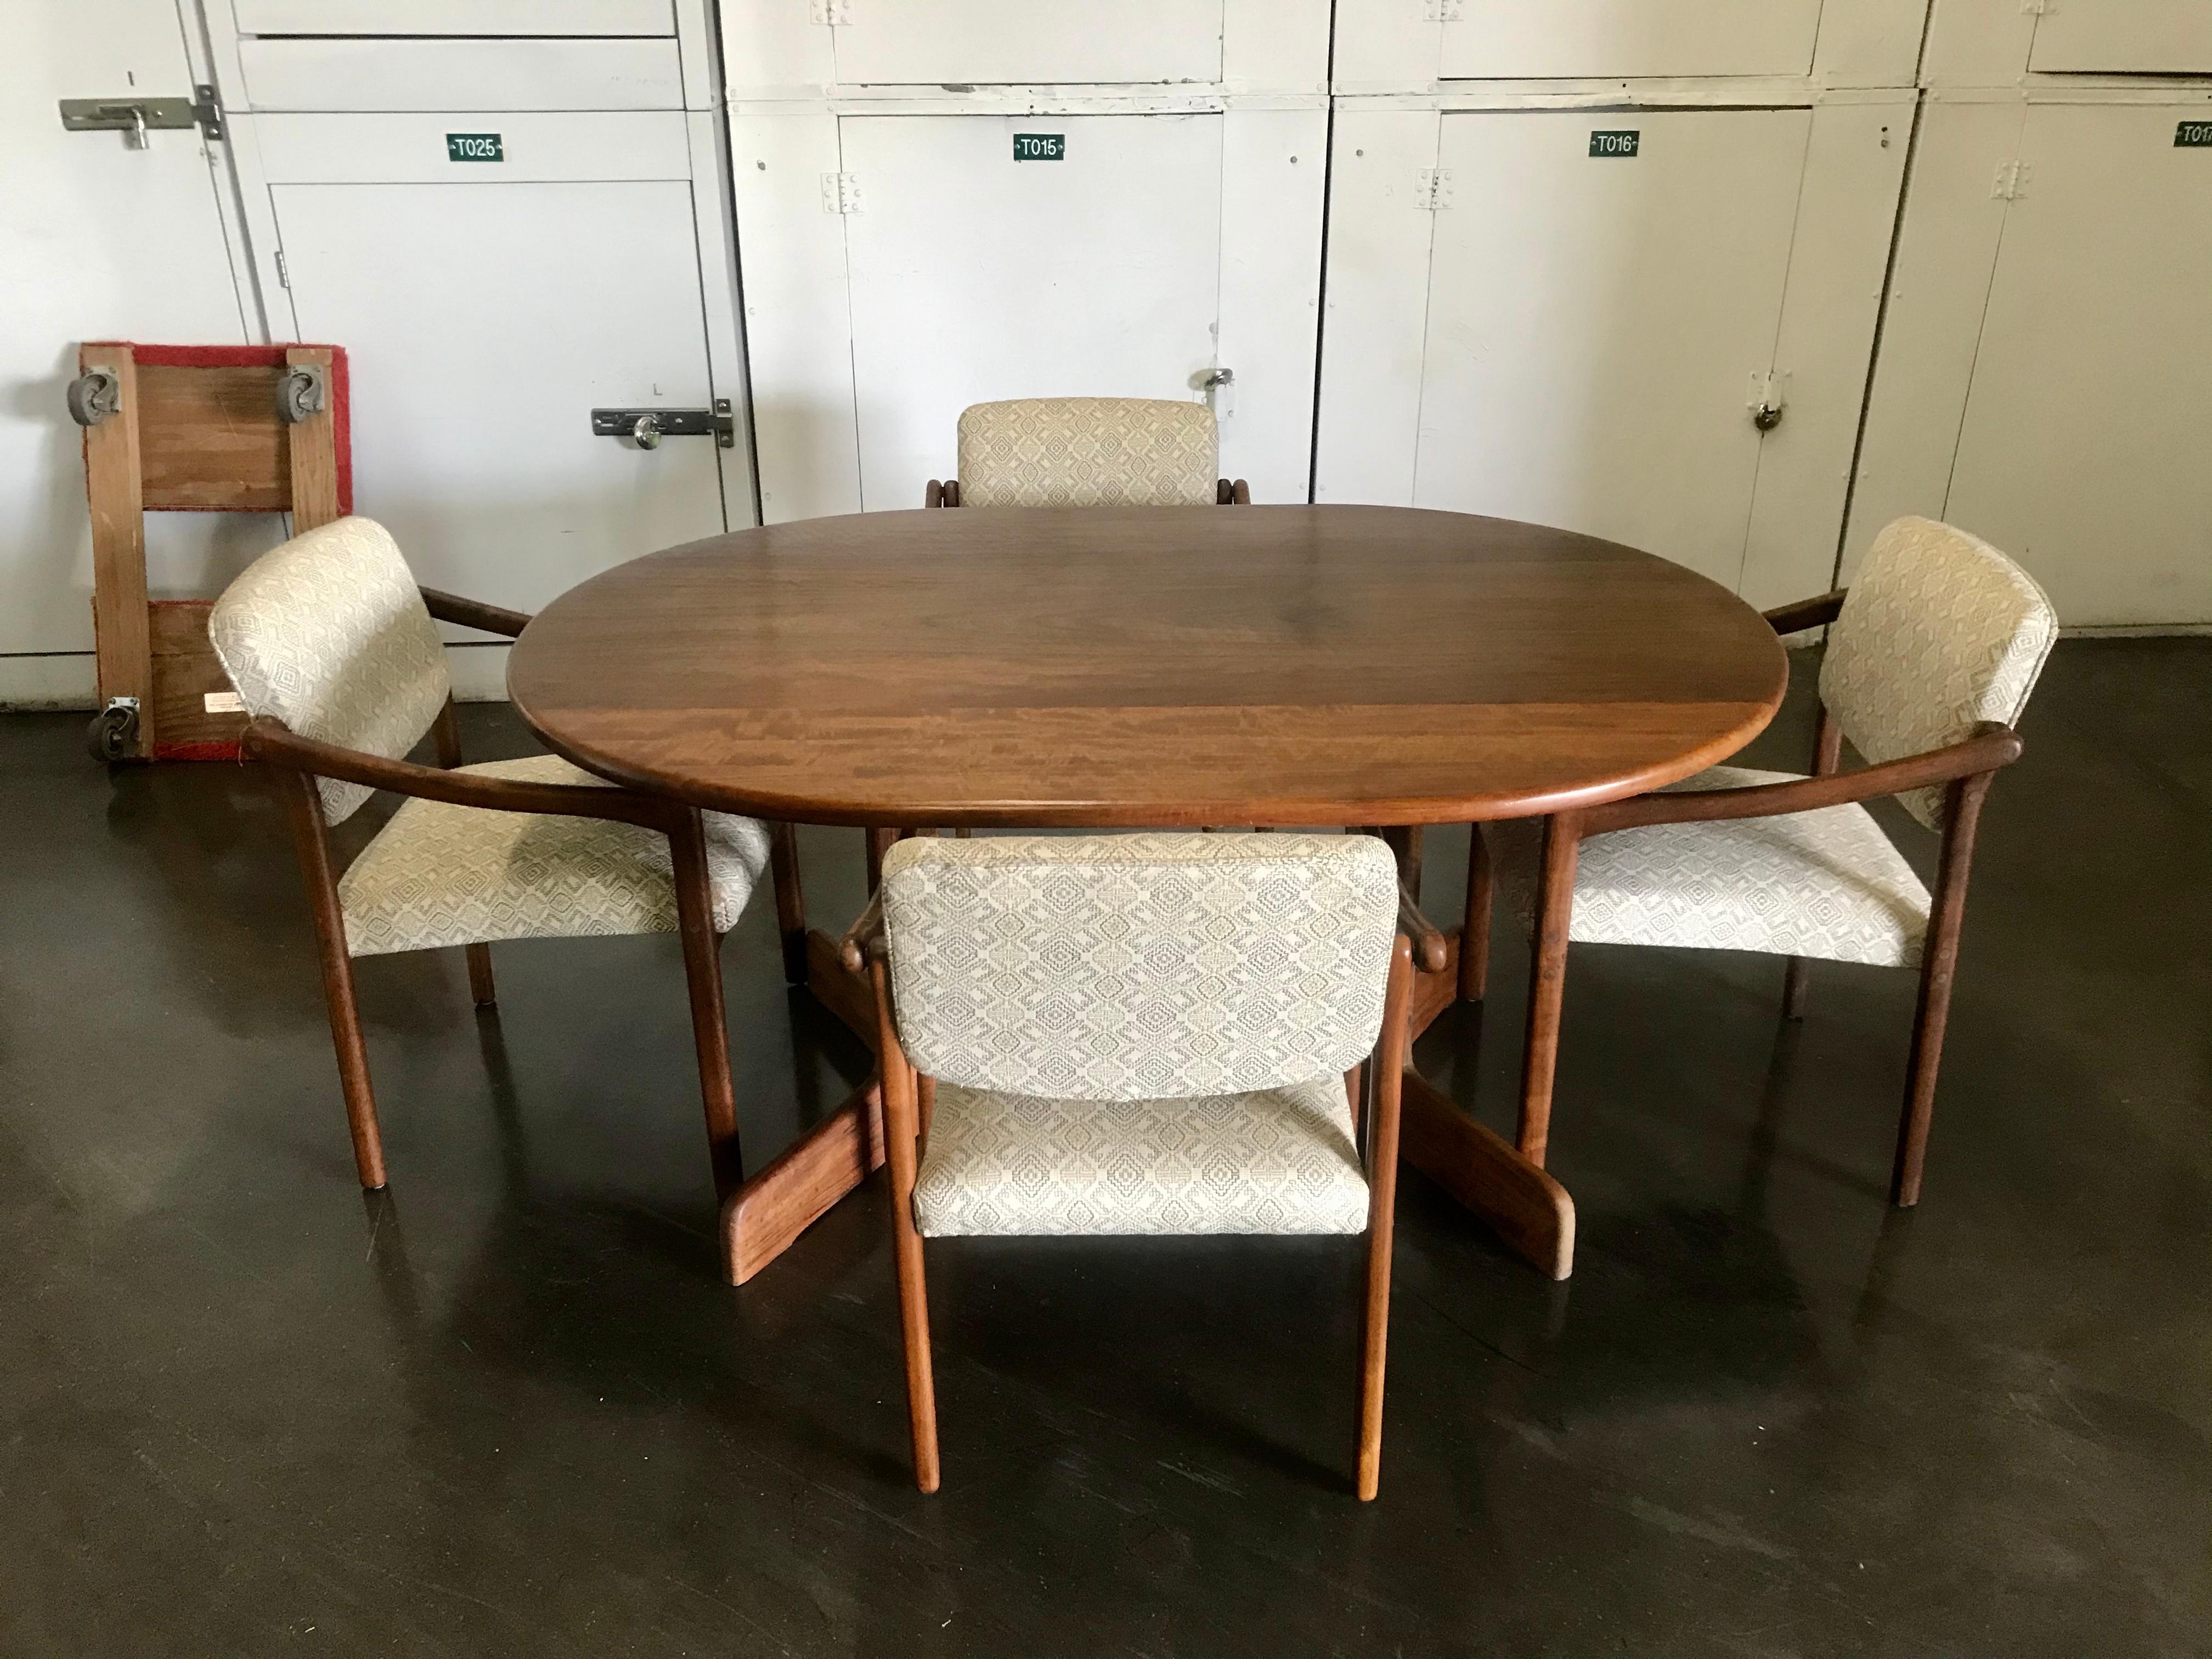 Great California design table and chairs.
Handcrafted solid Shedua wood (African walnut)
Oval top showing the beautiful wood grain in different cuts.
It also has a nice scale, not too big and not too small, with a sturdy footed base 29